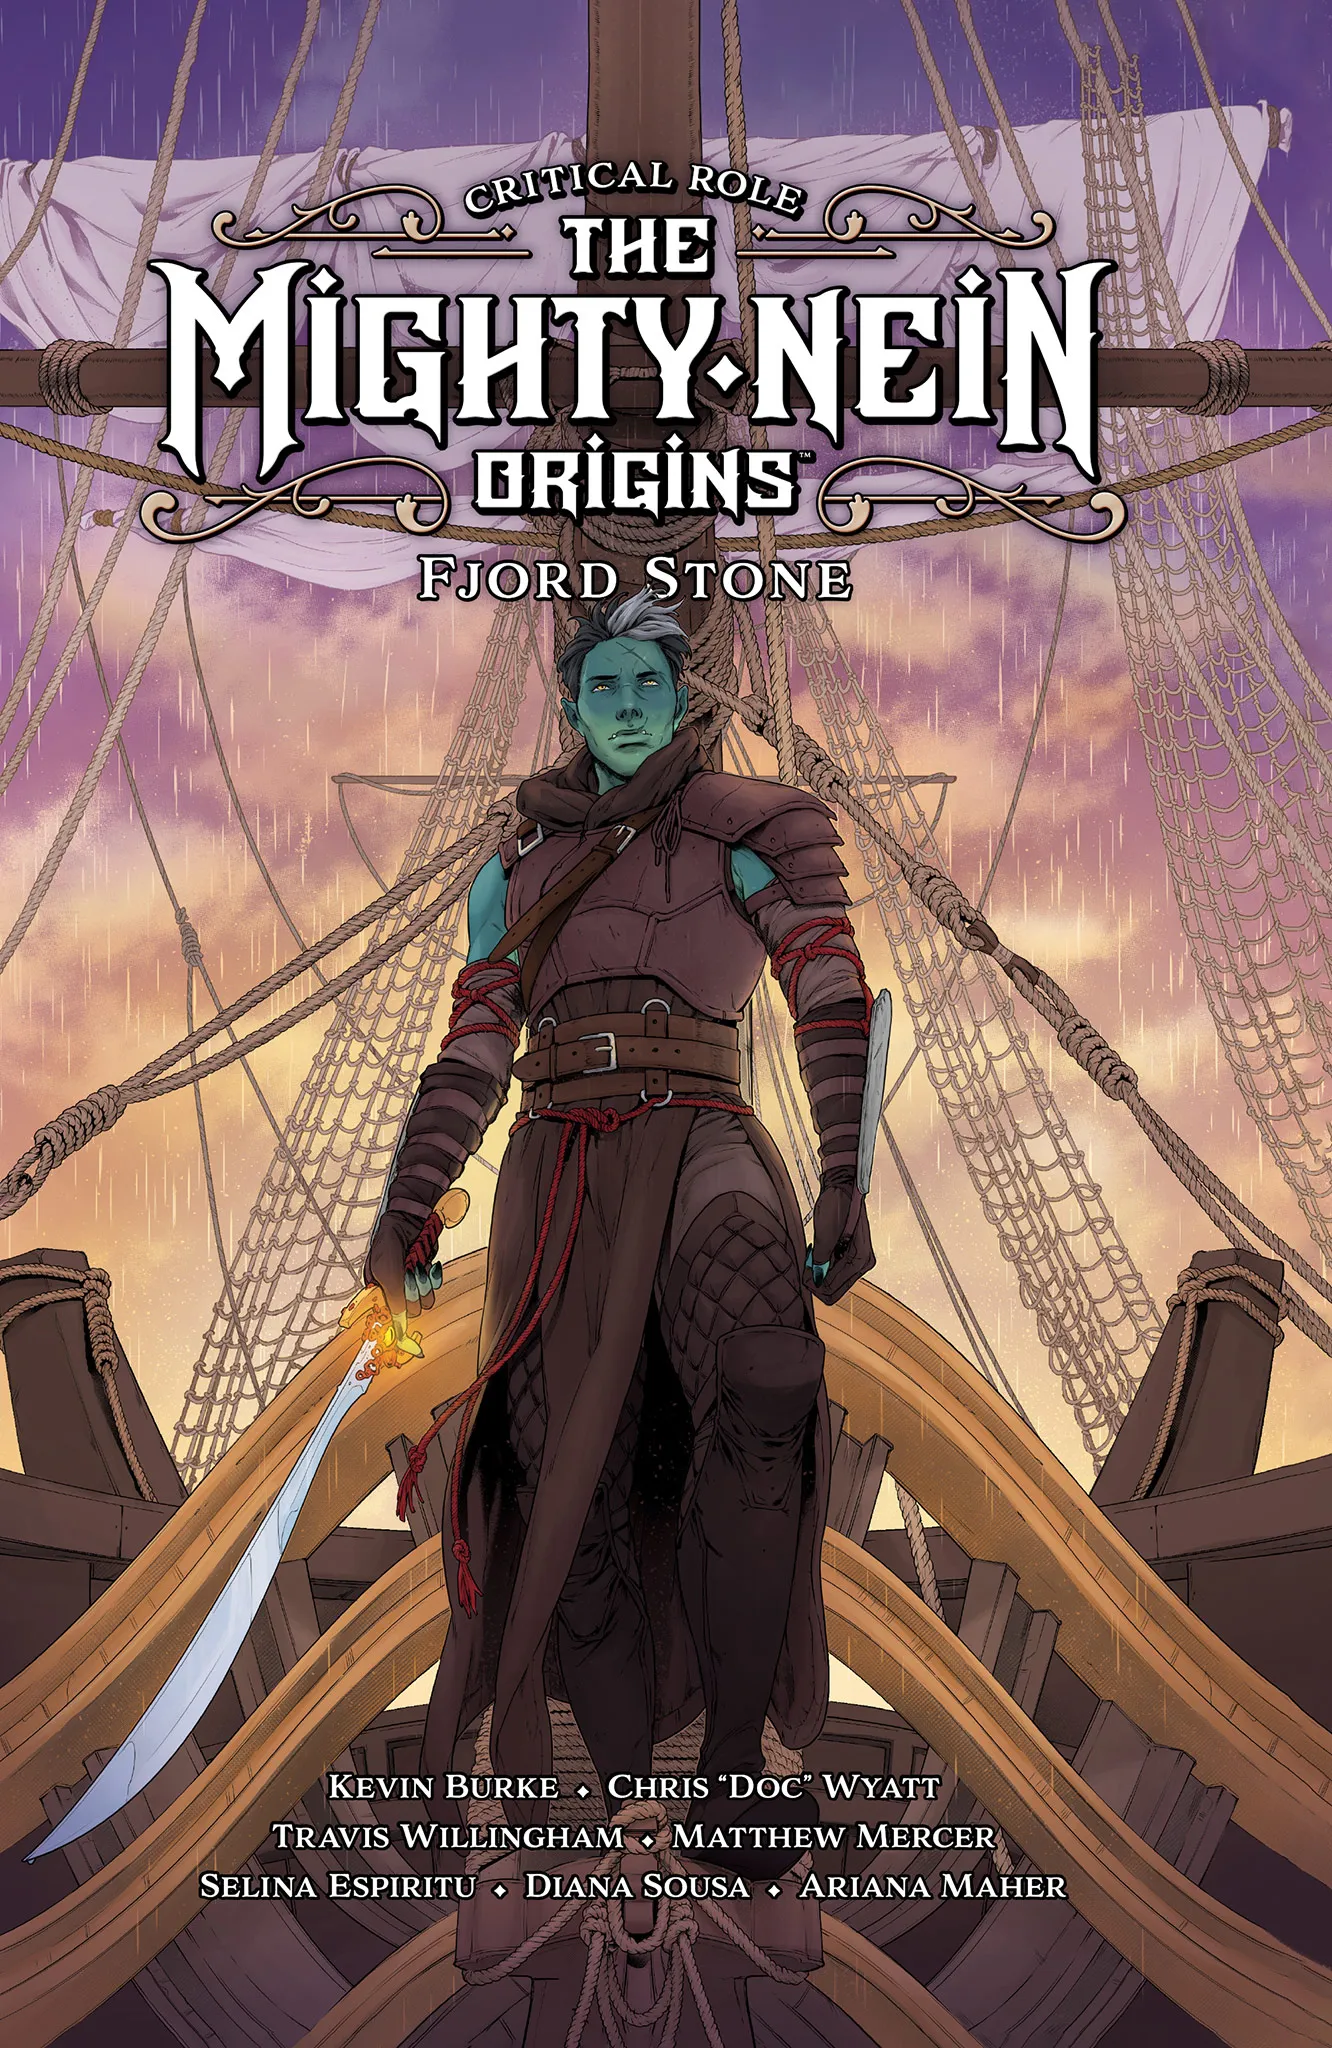 Fjord Stone (Critical Role: The Mighty Nein Origins)